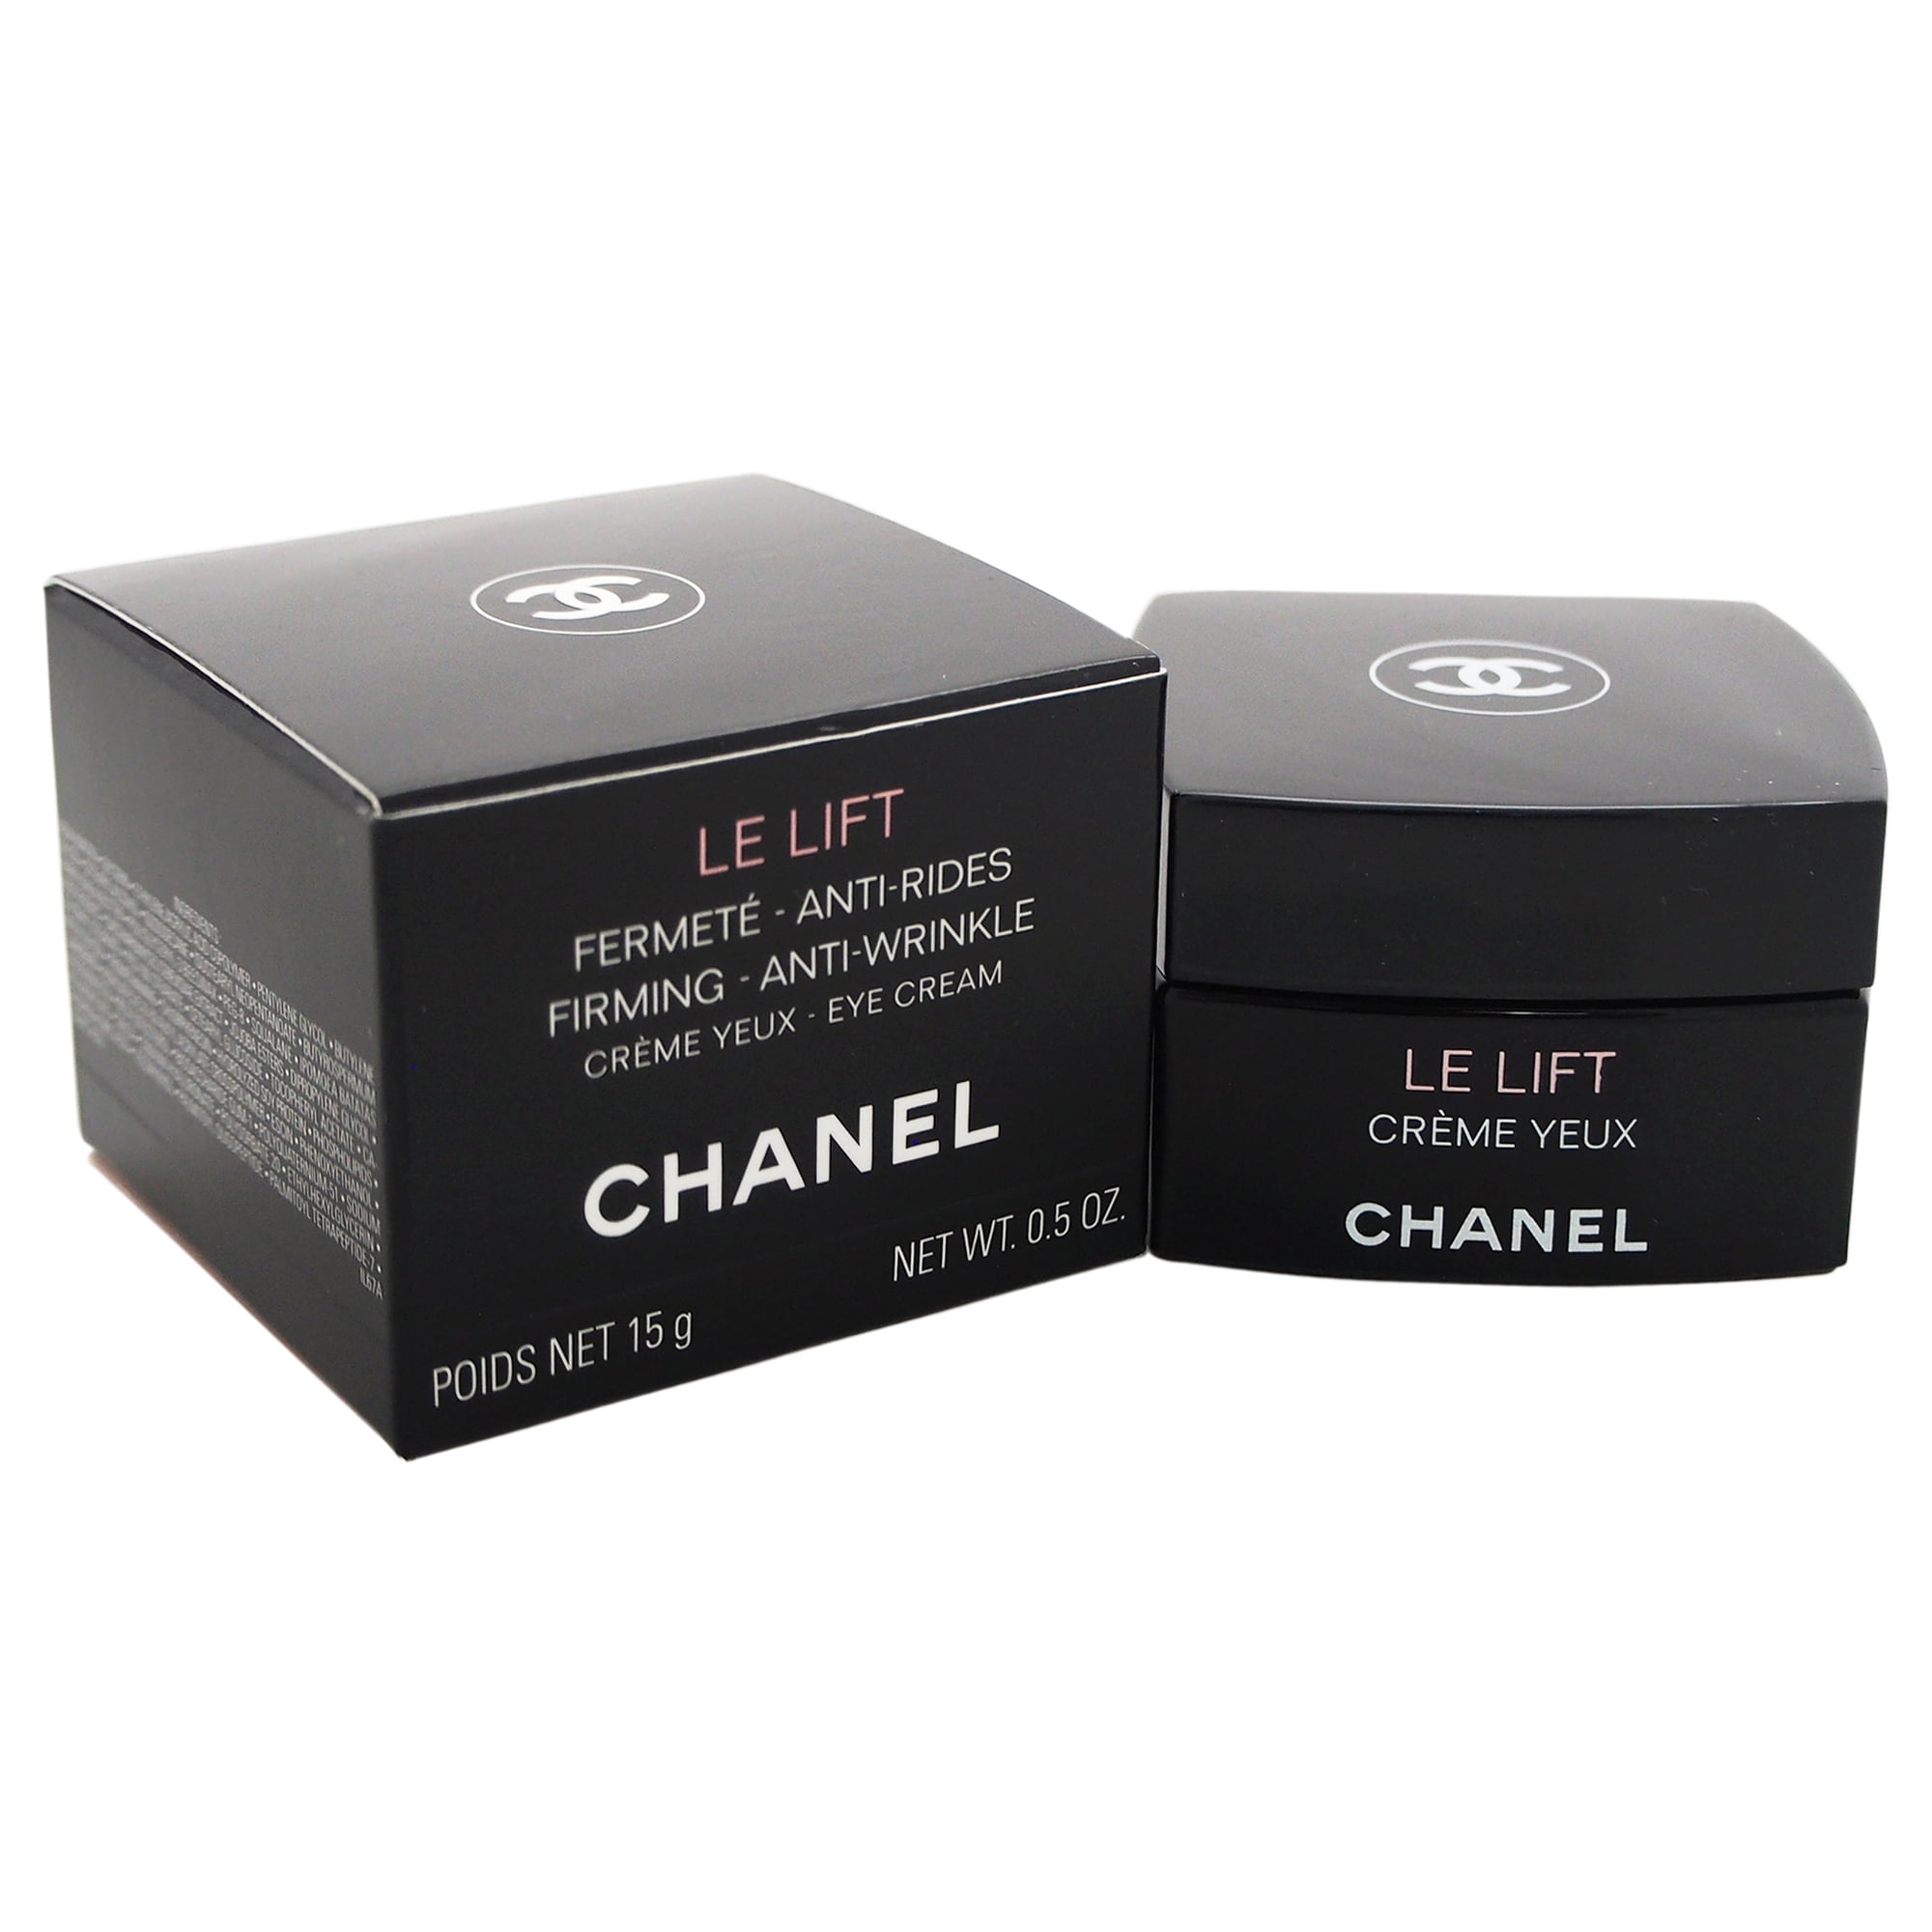 chanel skin care full size